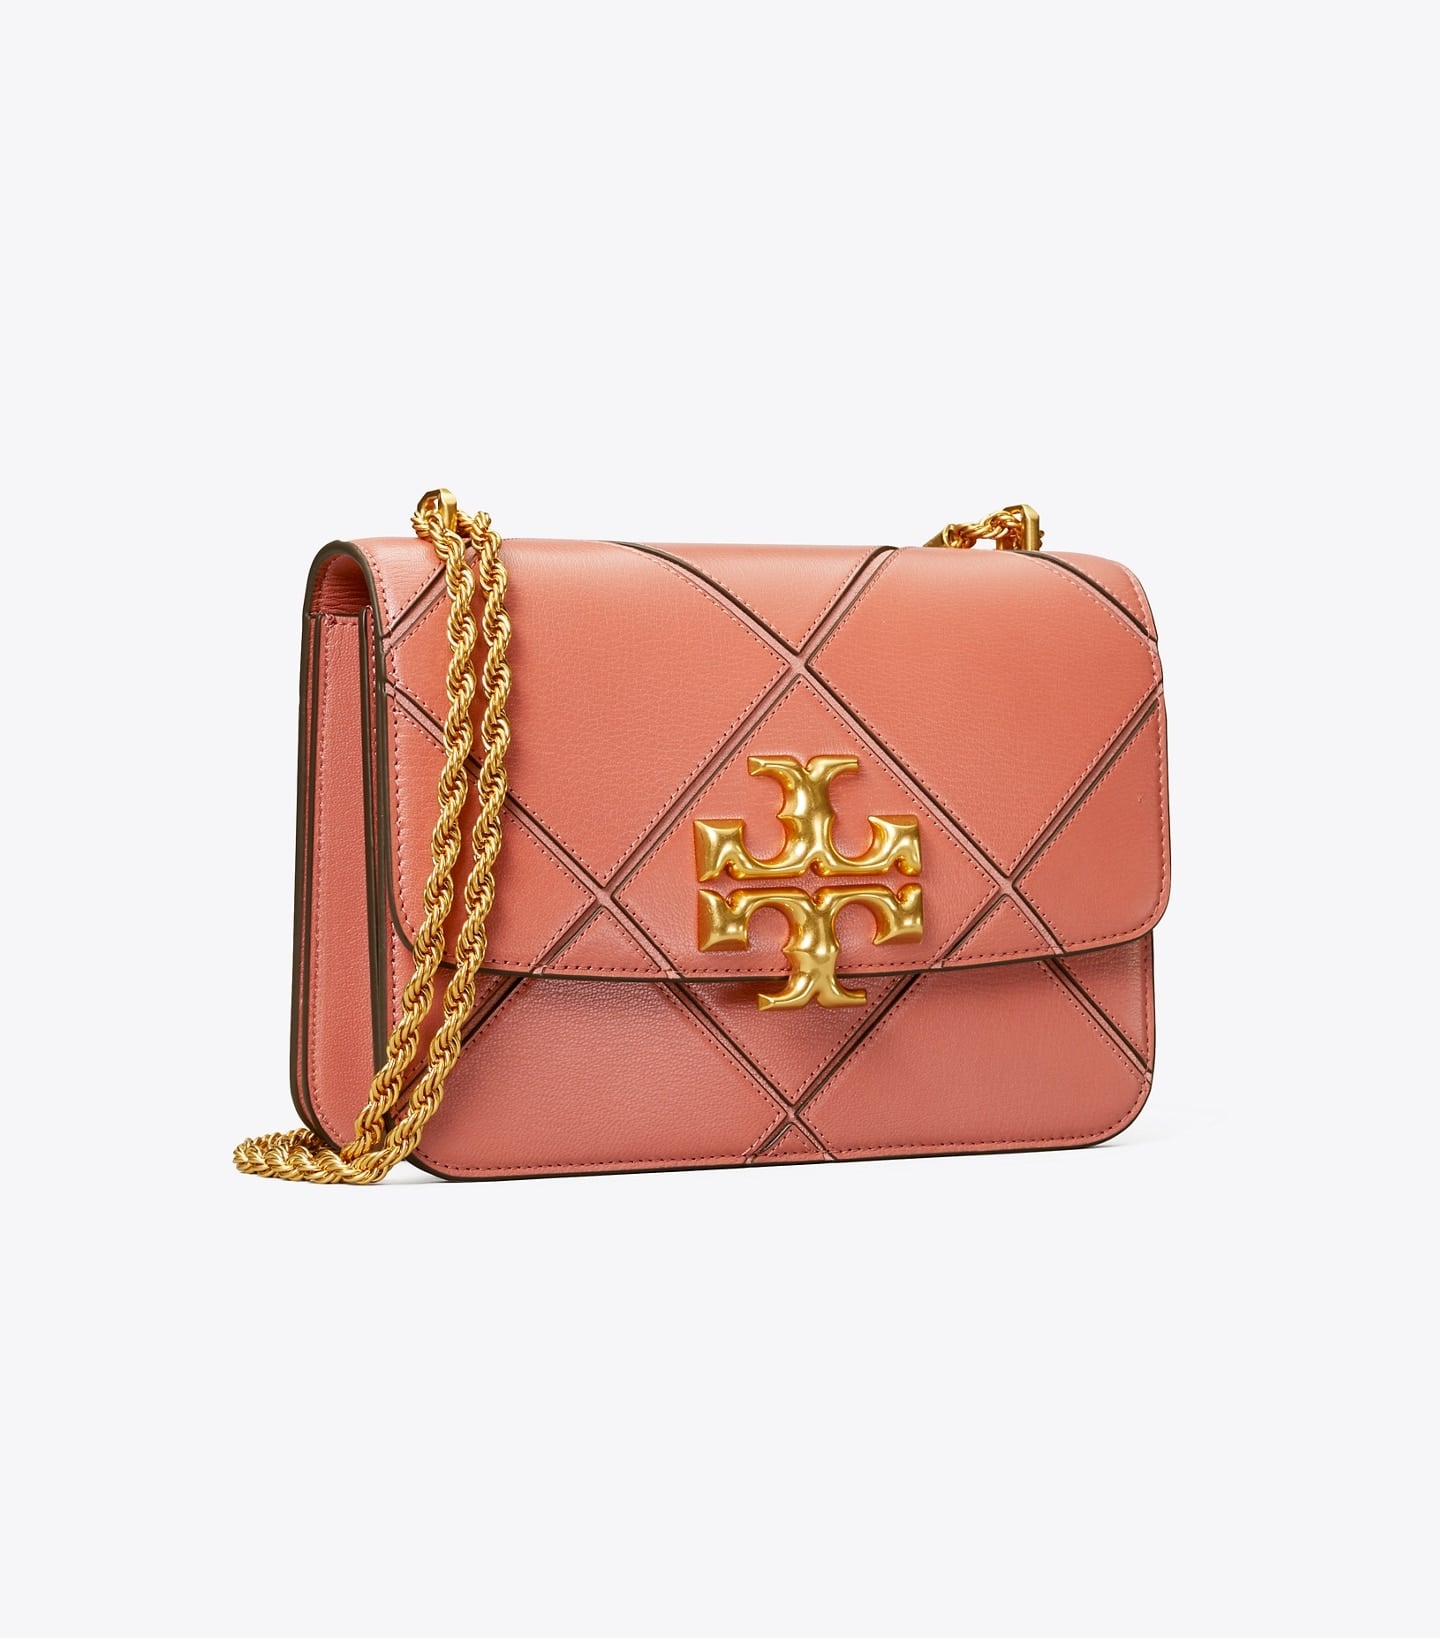 Tory Burch Eleanor Bag | Sorry in Advance to My Budget, but These 21 Gold- Chain Bags Can Take All My Money | POPSUGAR Fashion Photo 18